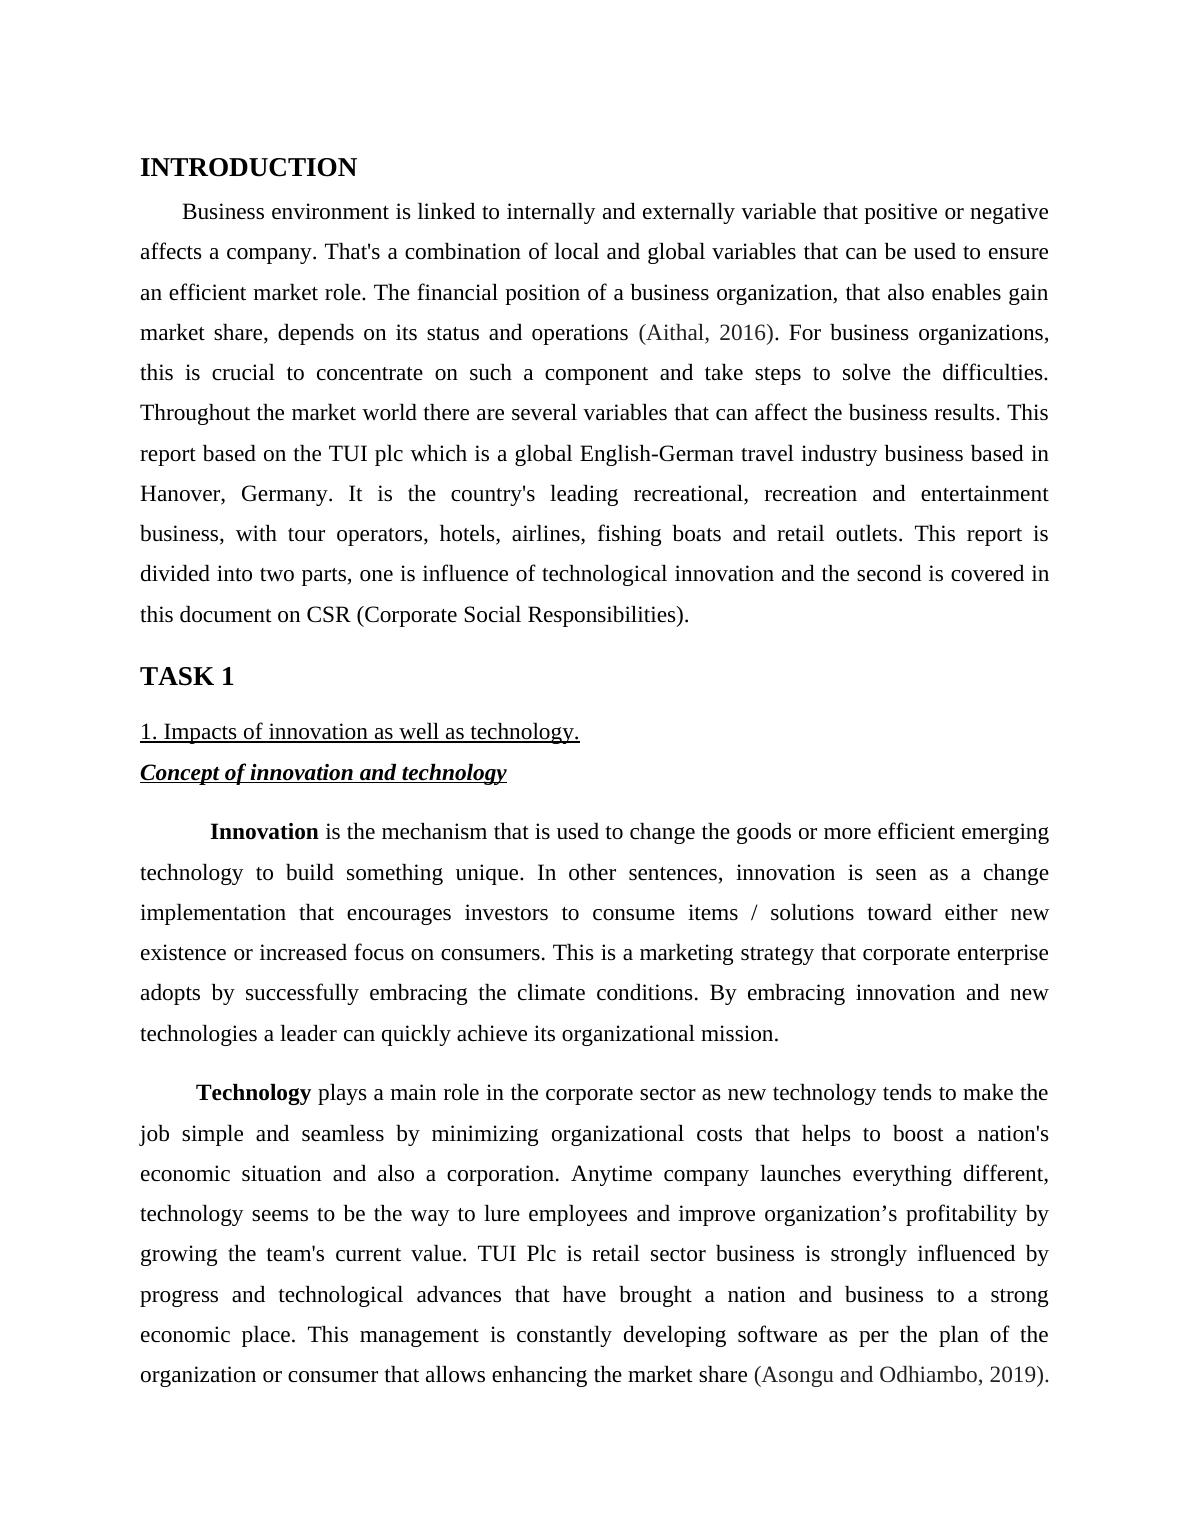 Impacts of Innovation and Technology on Business Environment - A Case Study of TUI Plc_4